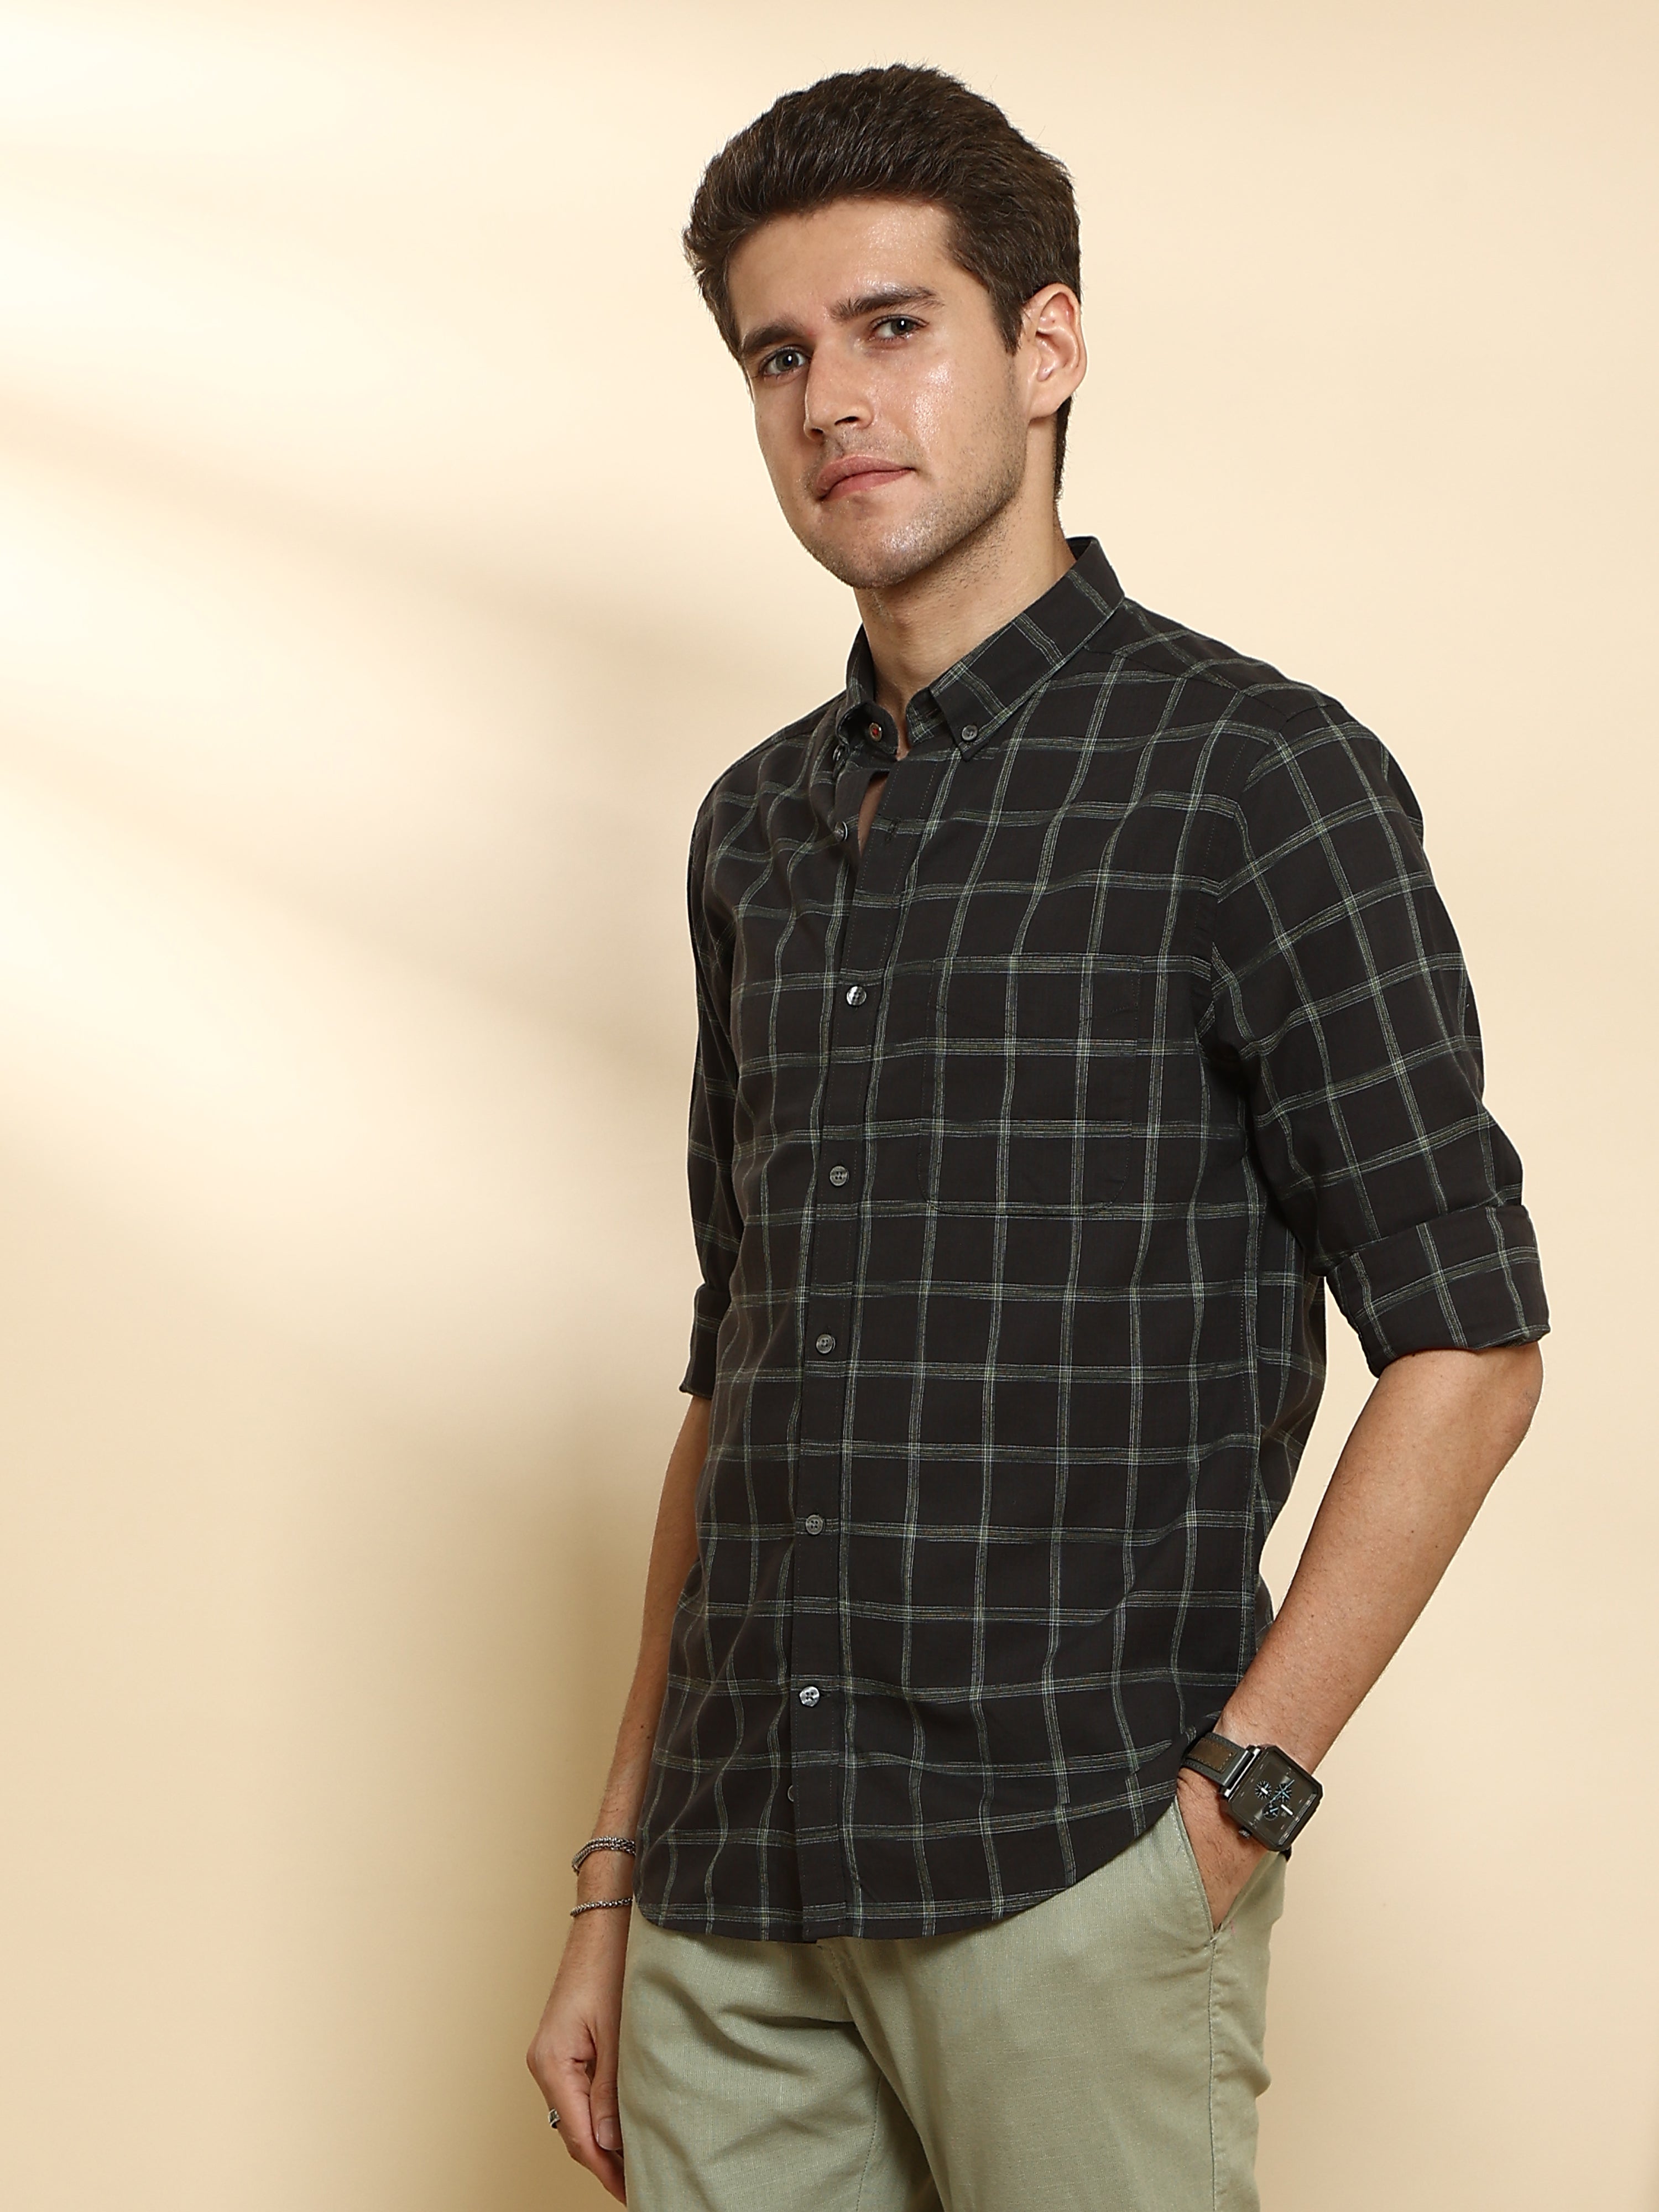 Dark Green Casual Full Sleeve Check Shirt shop online at Estilocus. • Full-sleeve check shirt• Cut and sew placket• Regular collar• Double button square cuff.• Single pocket with logo embroidery• Curved hemline• Finest quality sewing• Machine wash care• S